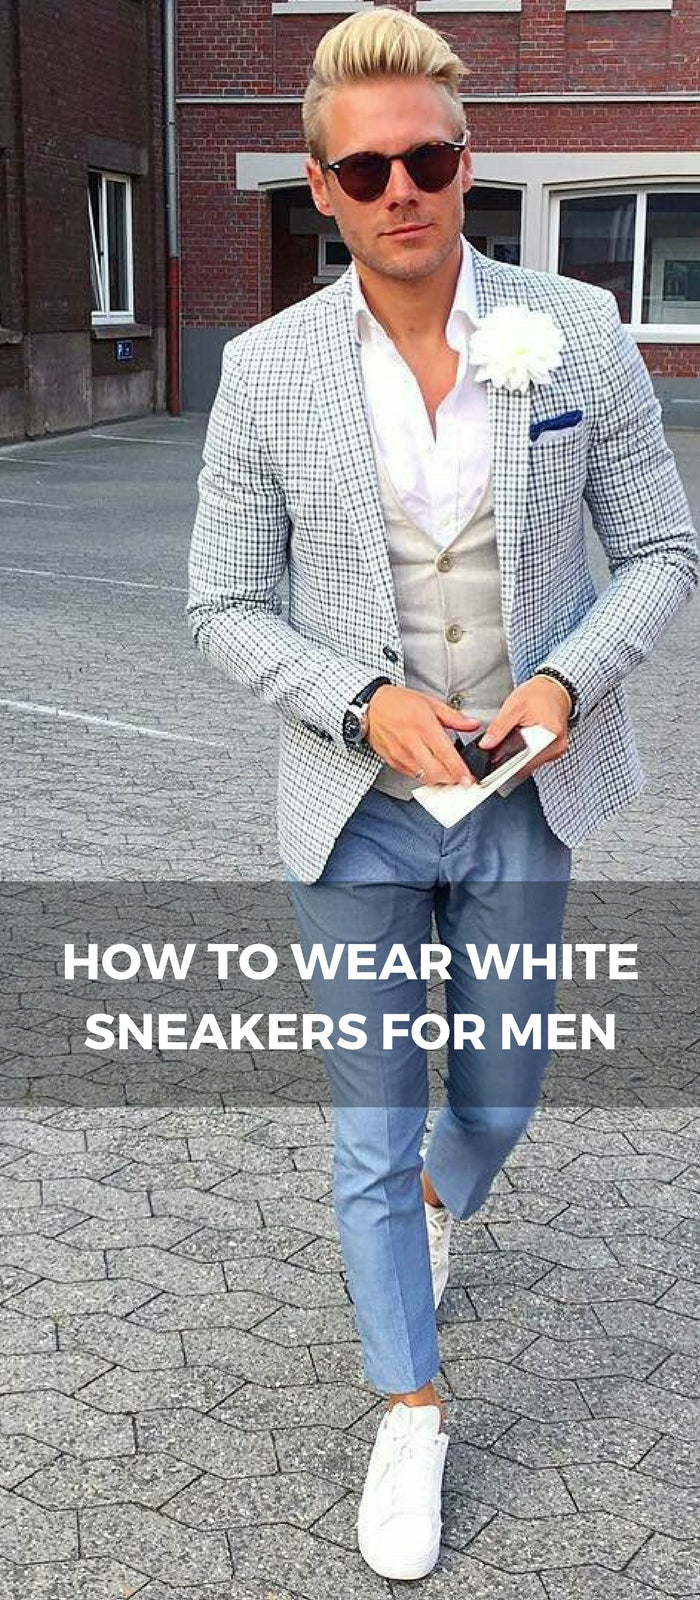 dress up with white sneakers